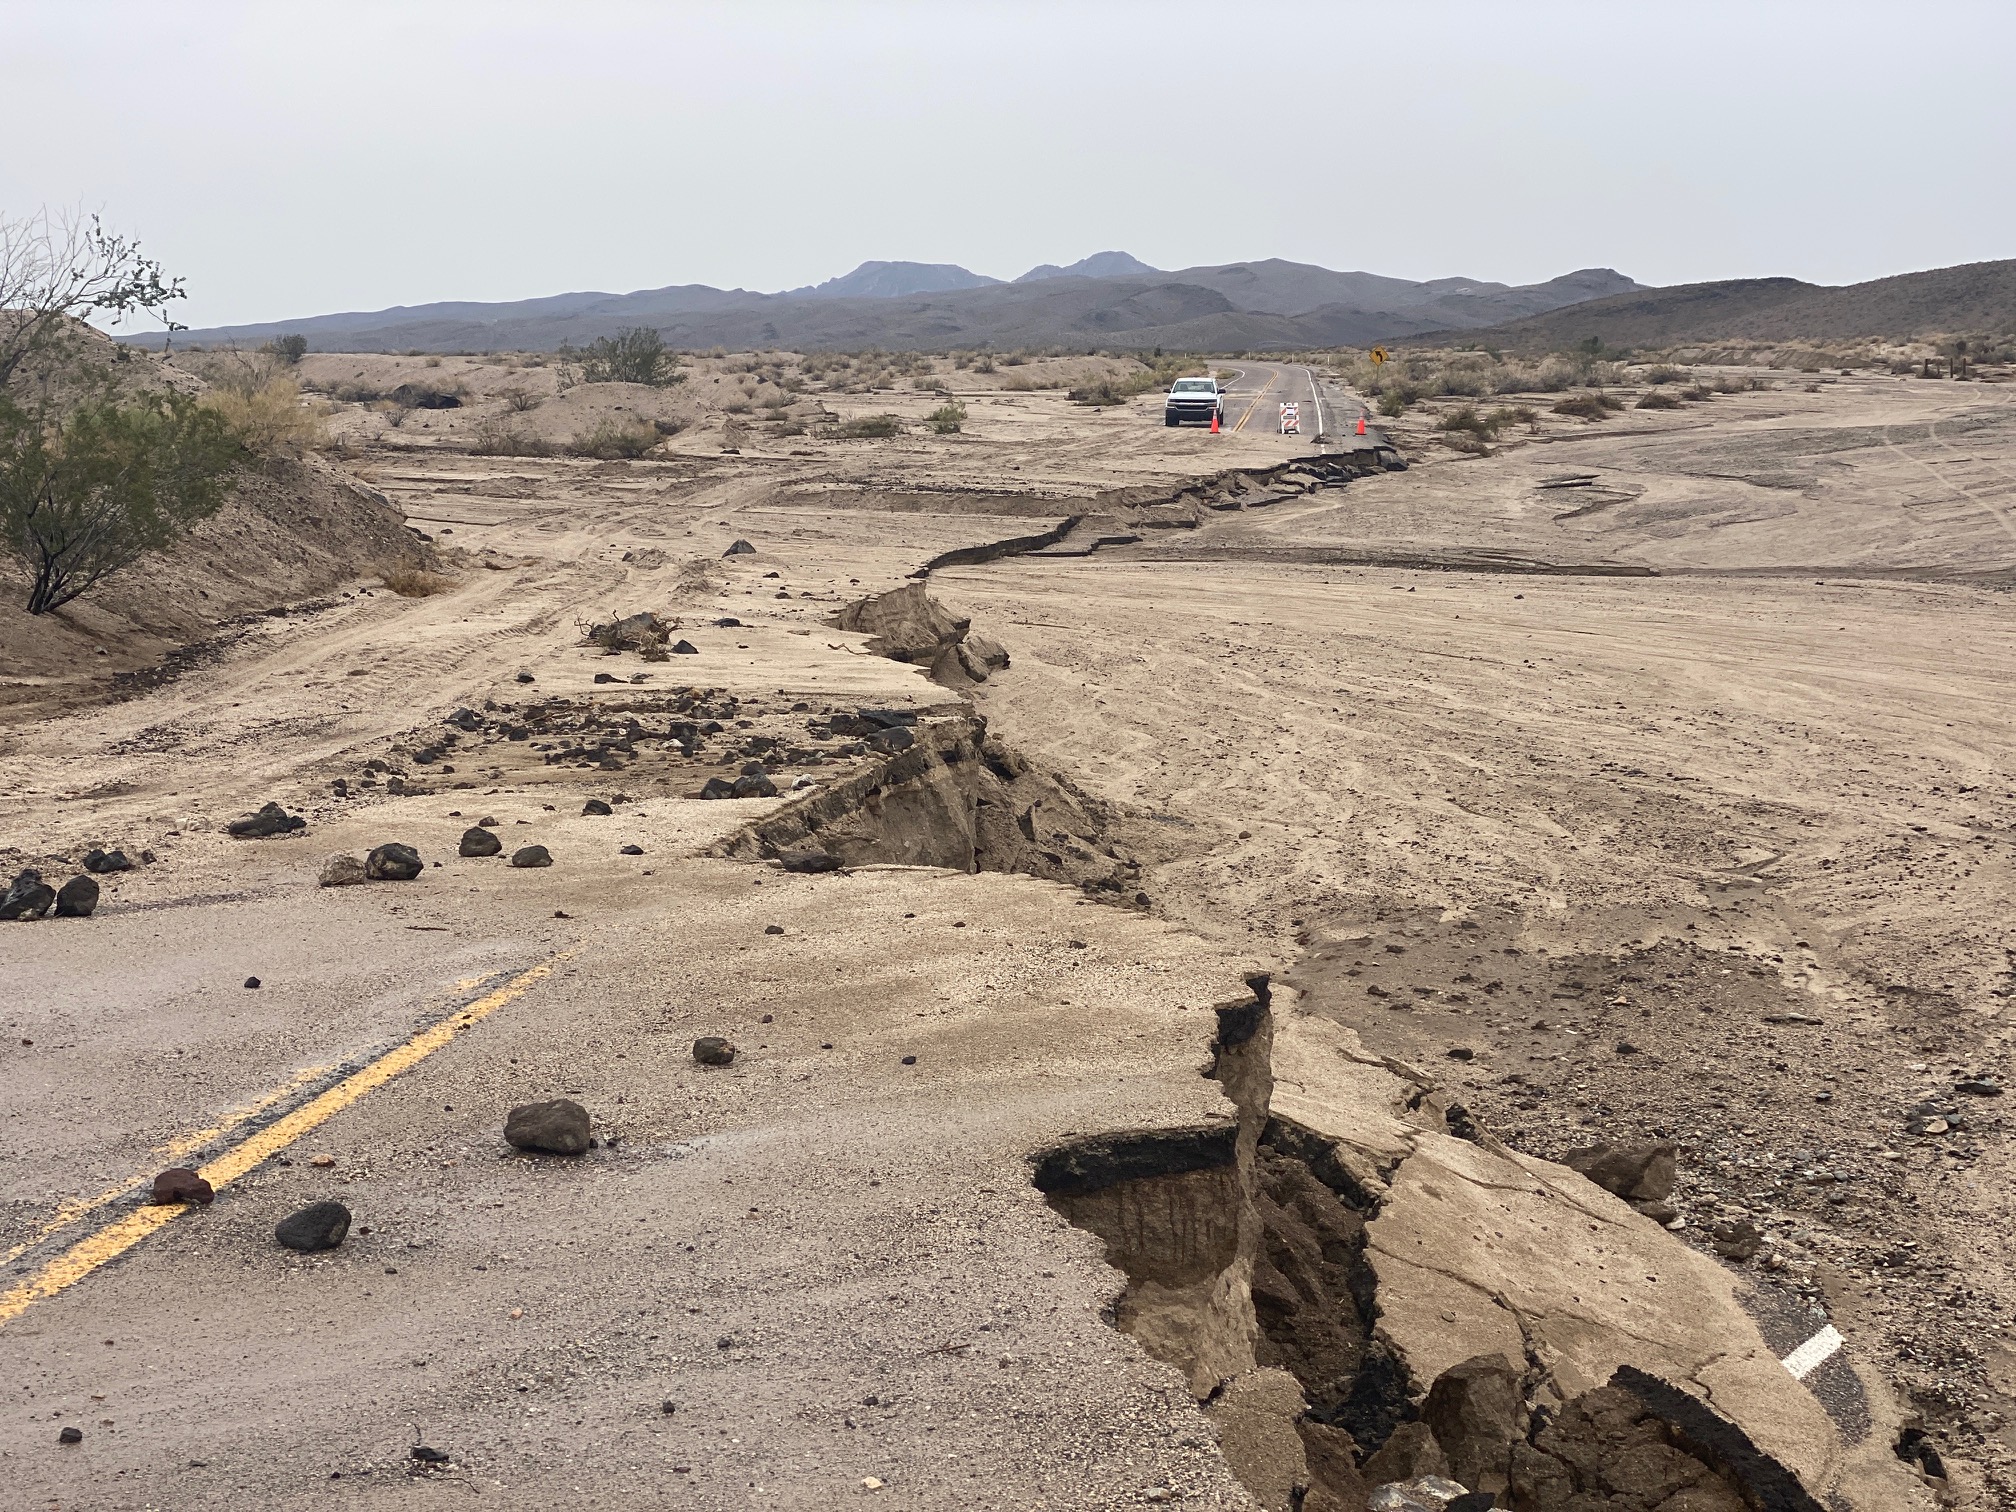 A paved road with debris on it abruptly ends, dropping off into a washed out section of dirt and debris